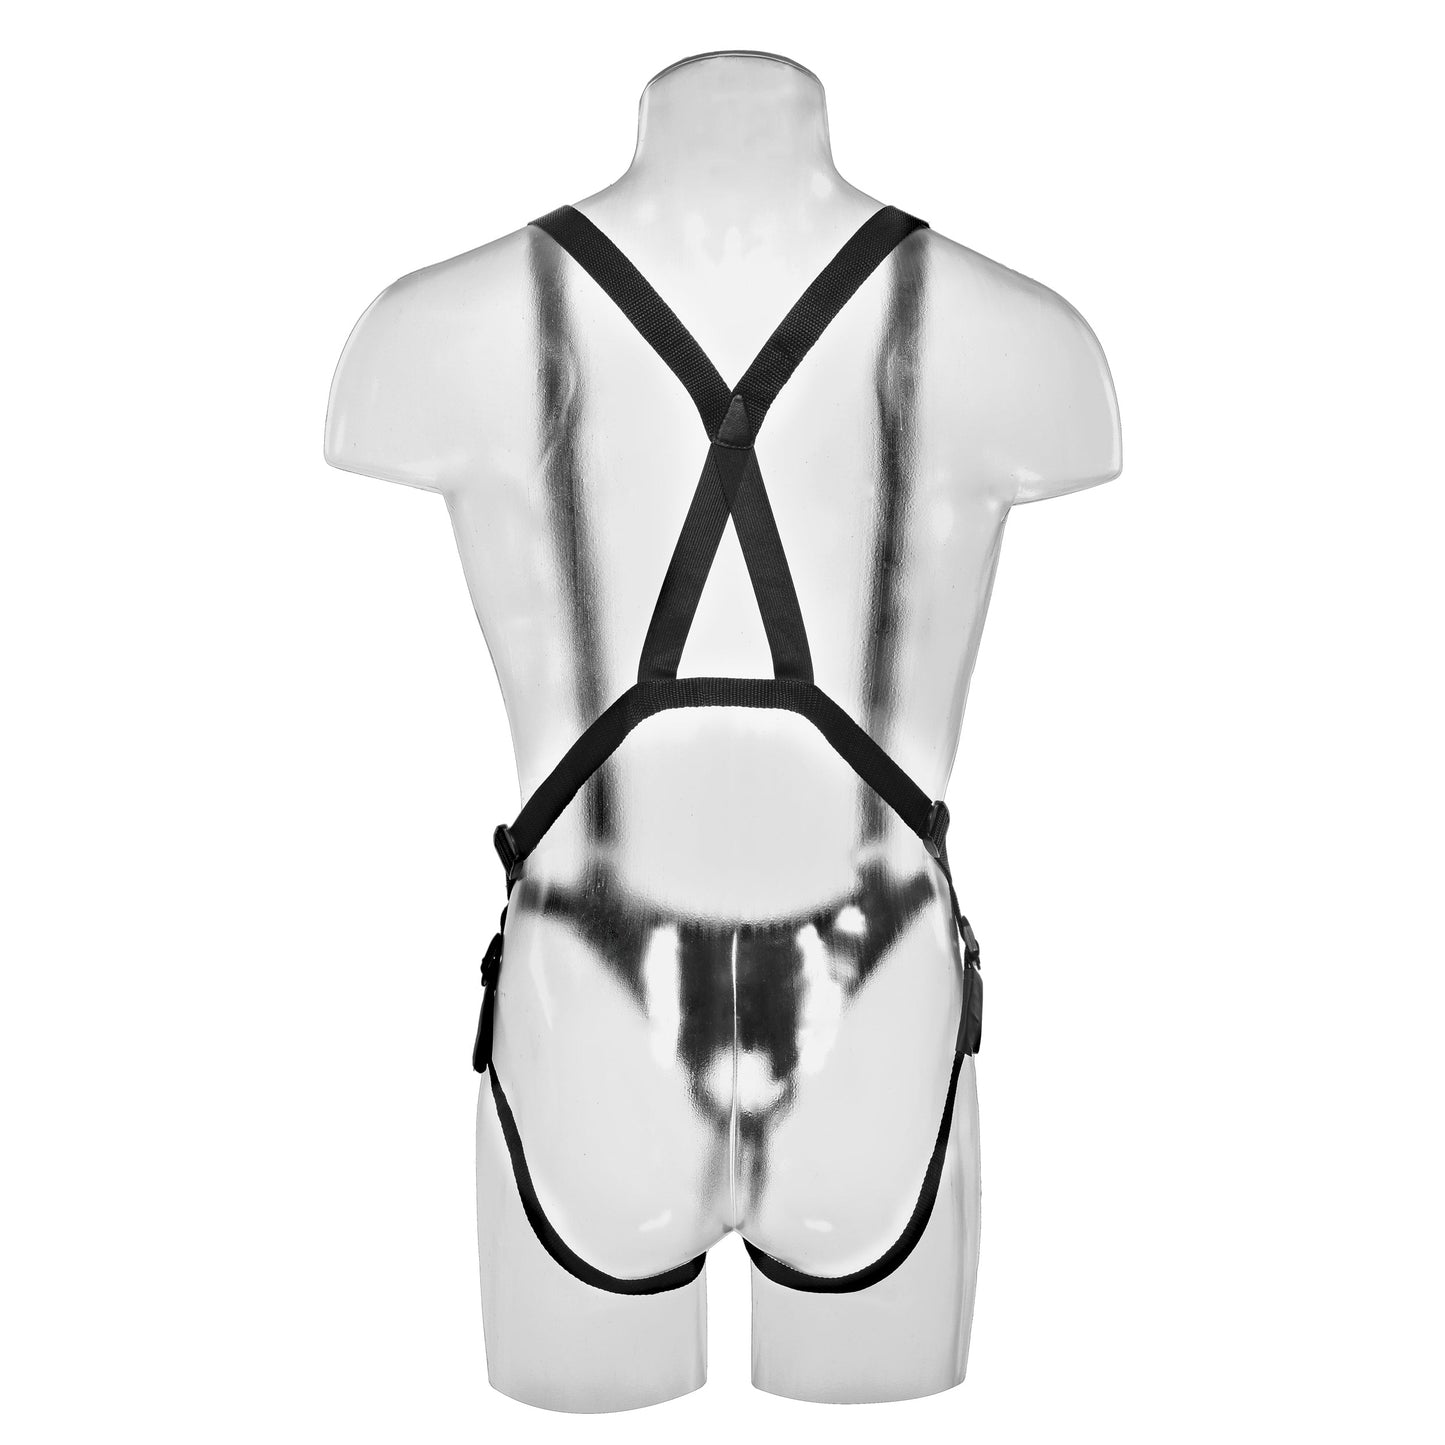 King Cock 10 Inch Hollow Strap-on Suspender  System - Flesh